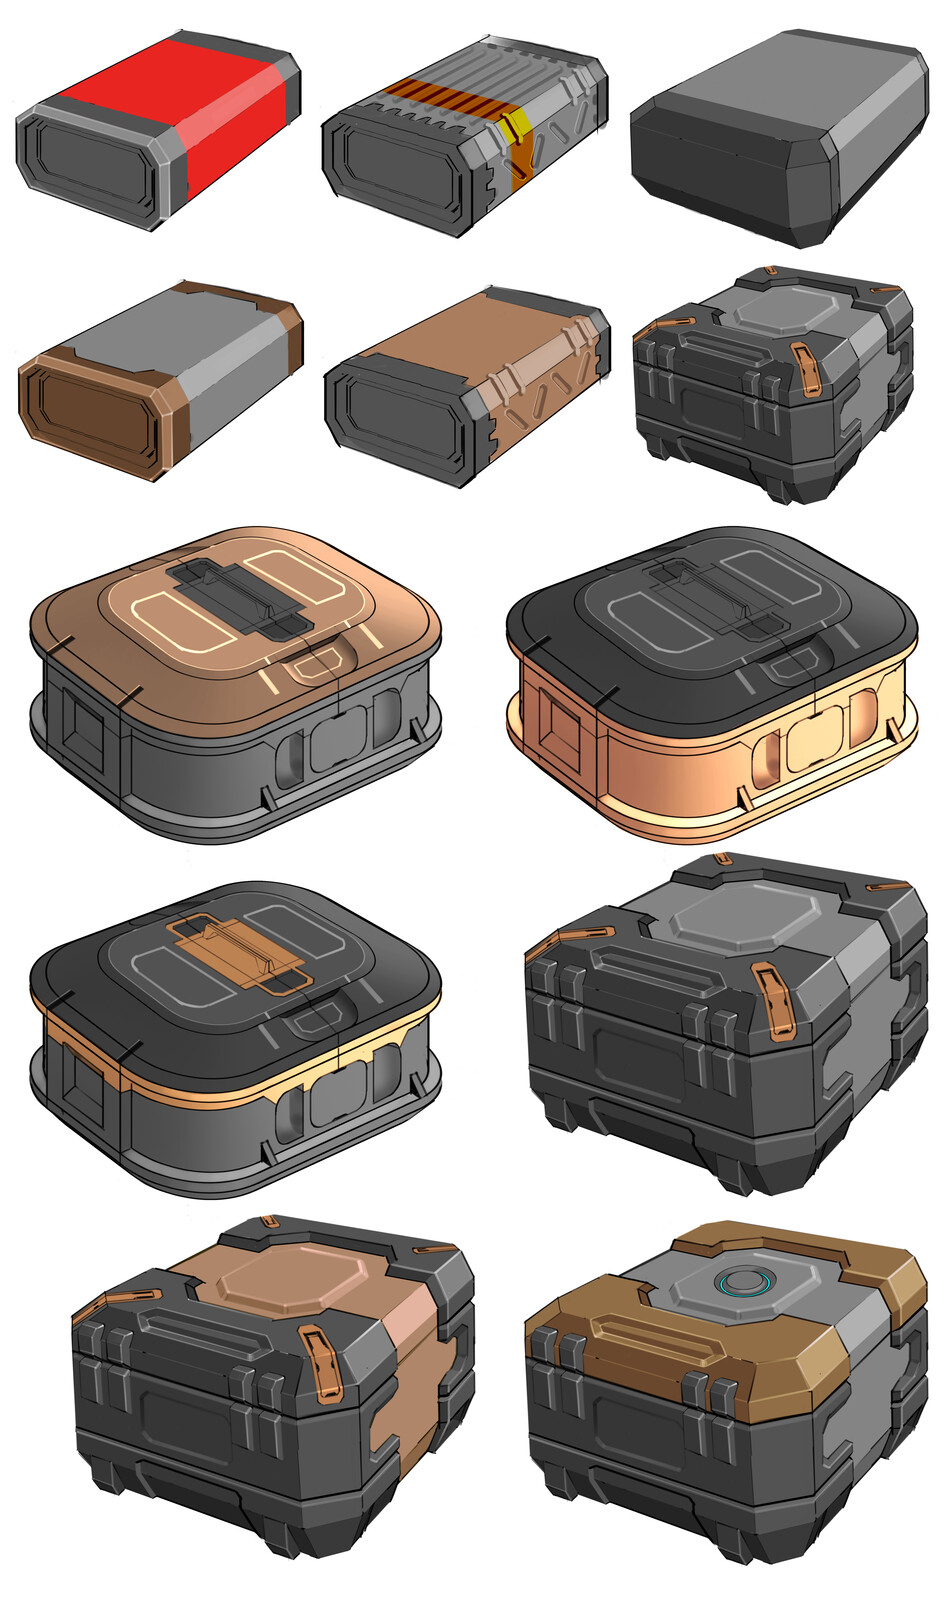 Plunder crate development.  All the collectibles gathered during the level is stored in the "plunder crate" to be picked up by the drone at the end of the level.